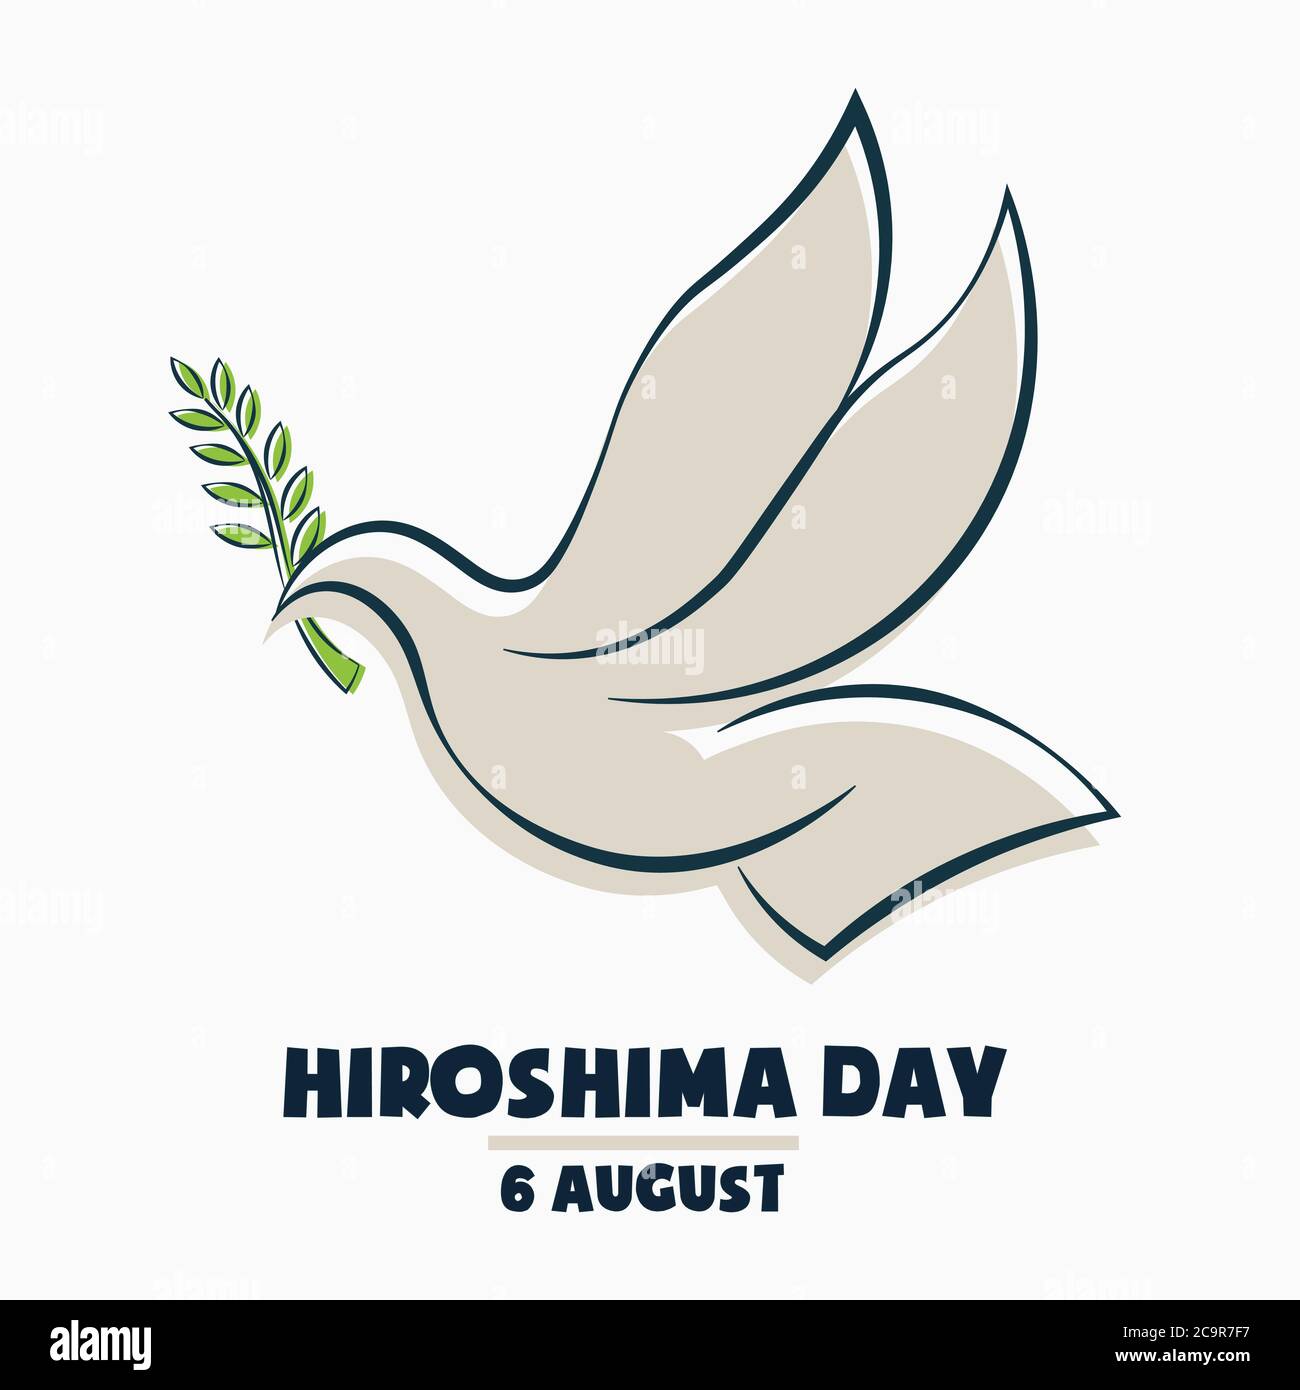 Hiroshima Day, 6 august, colored flying dove bird poster, flat illustration, vector Stock Vector